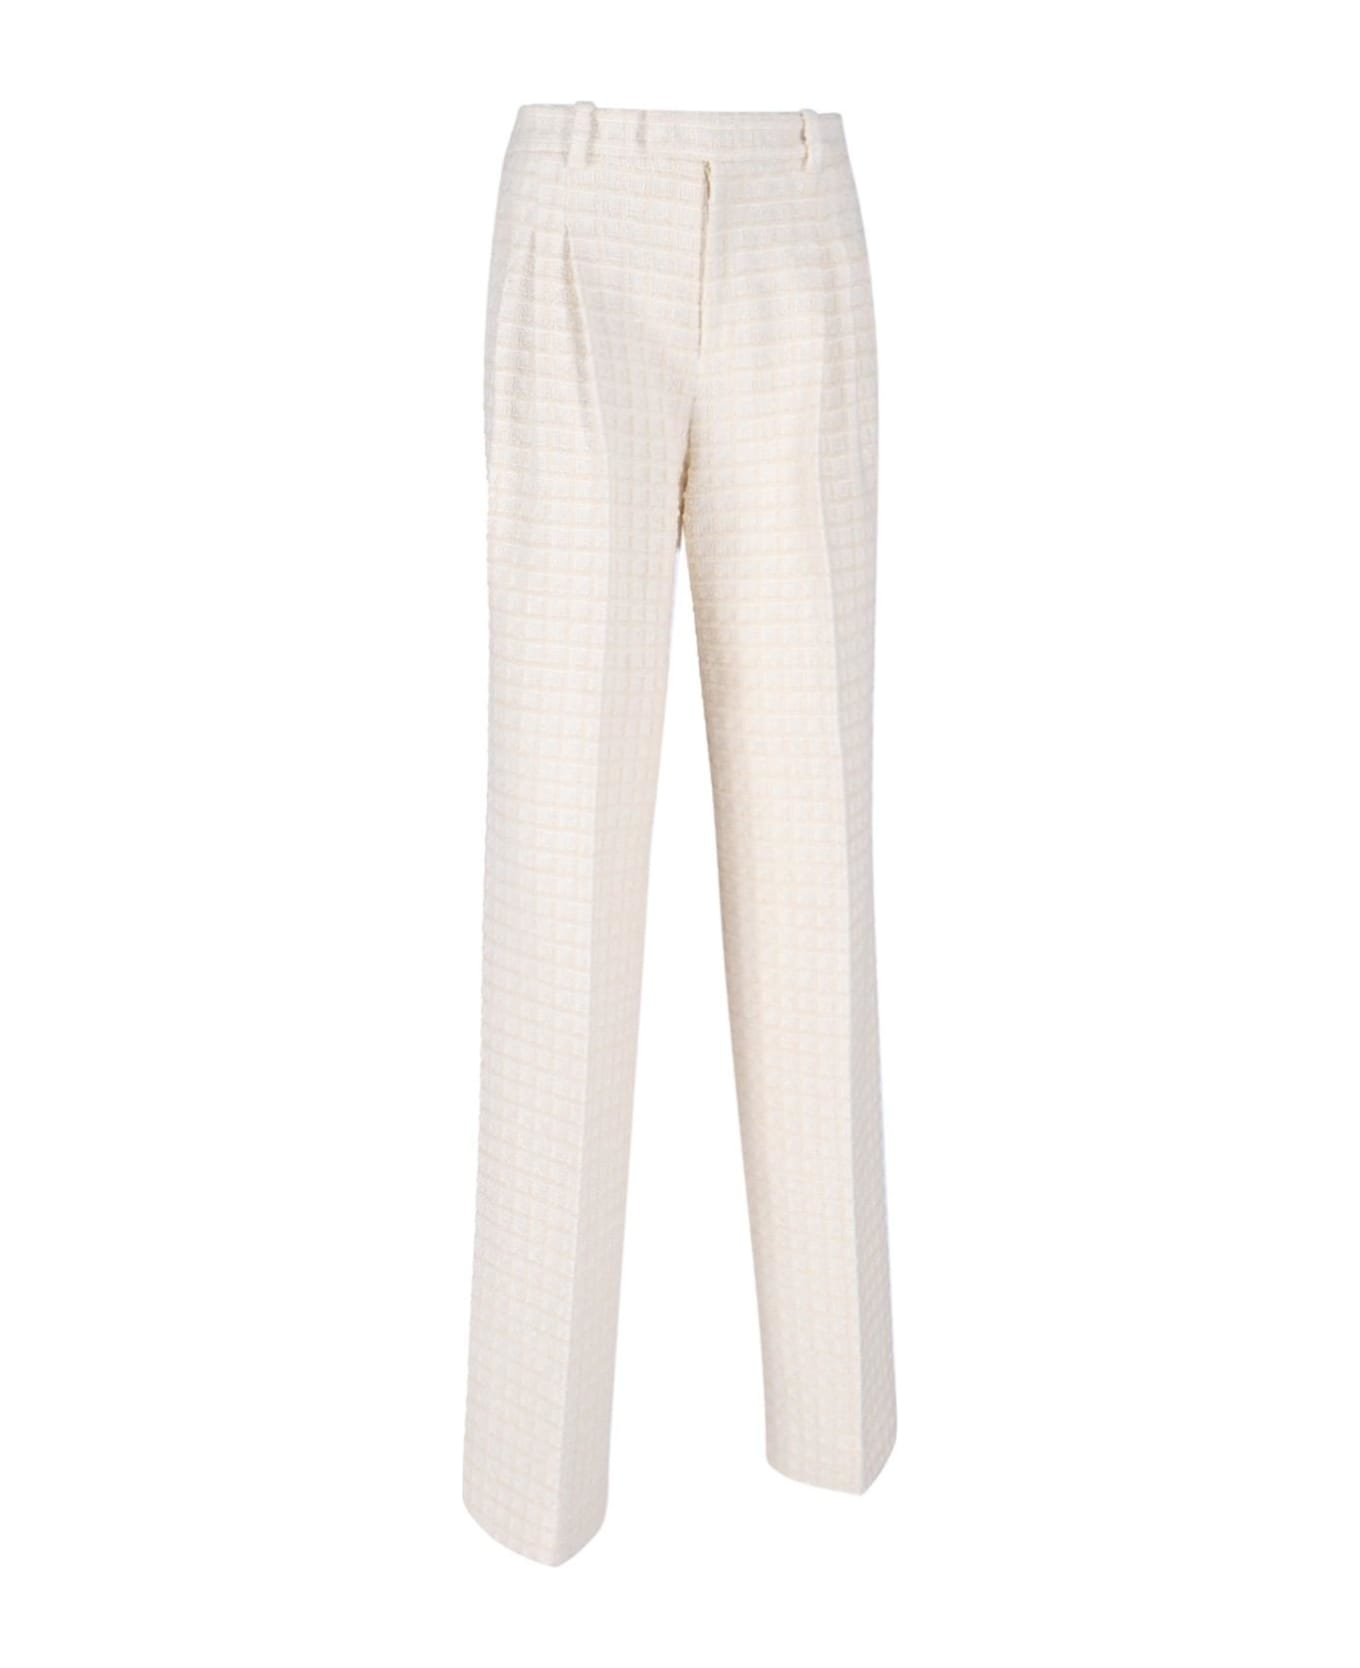 Gucci Tweed Trousers - Ivory ボトムス